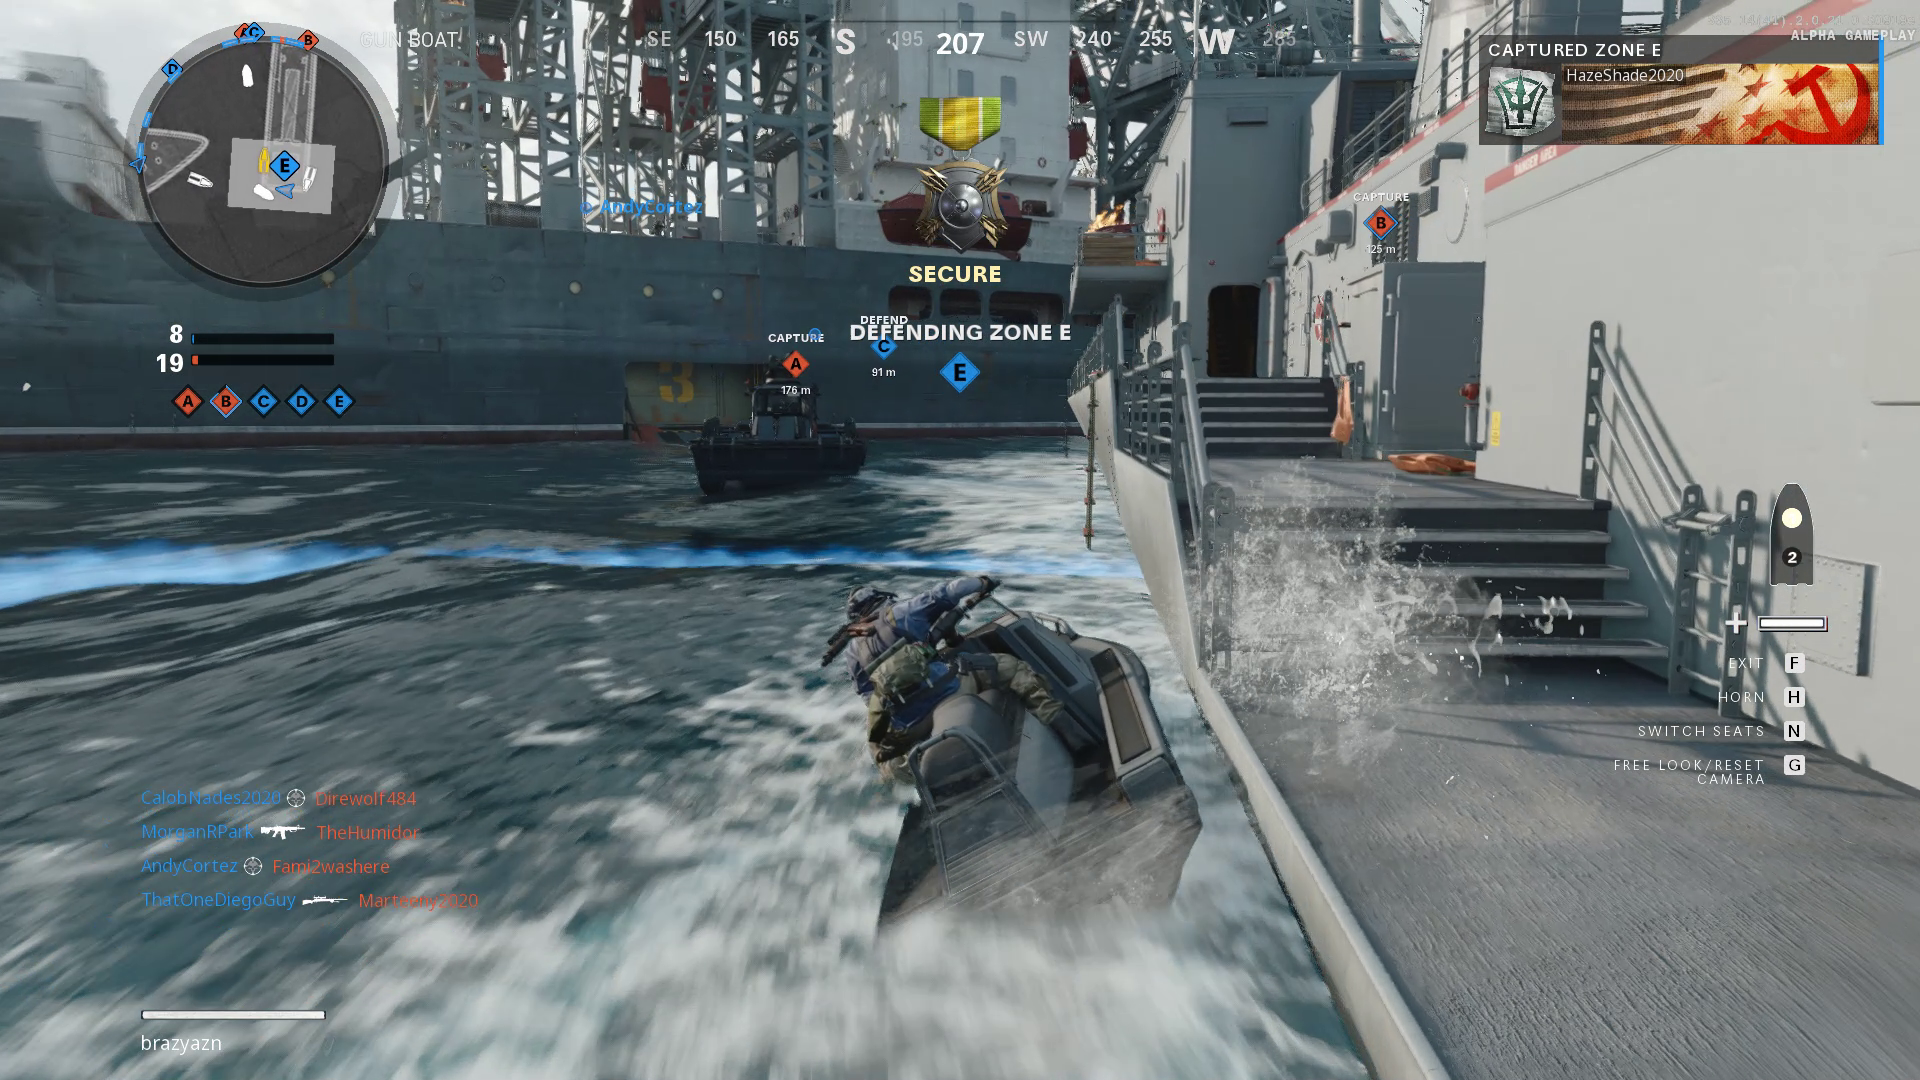 Getting between capture points efficiently in Armada will require using sea vehicles and ziplines.